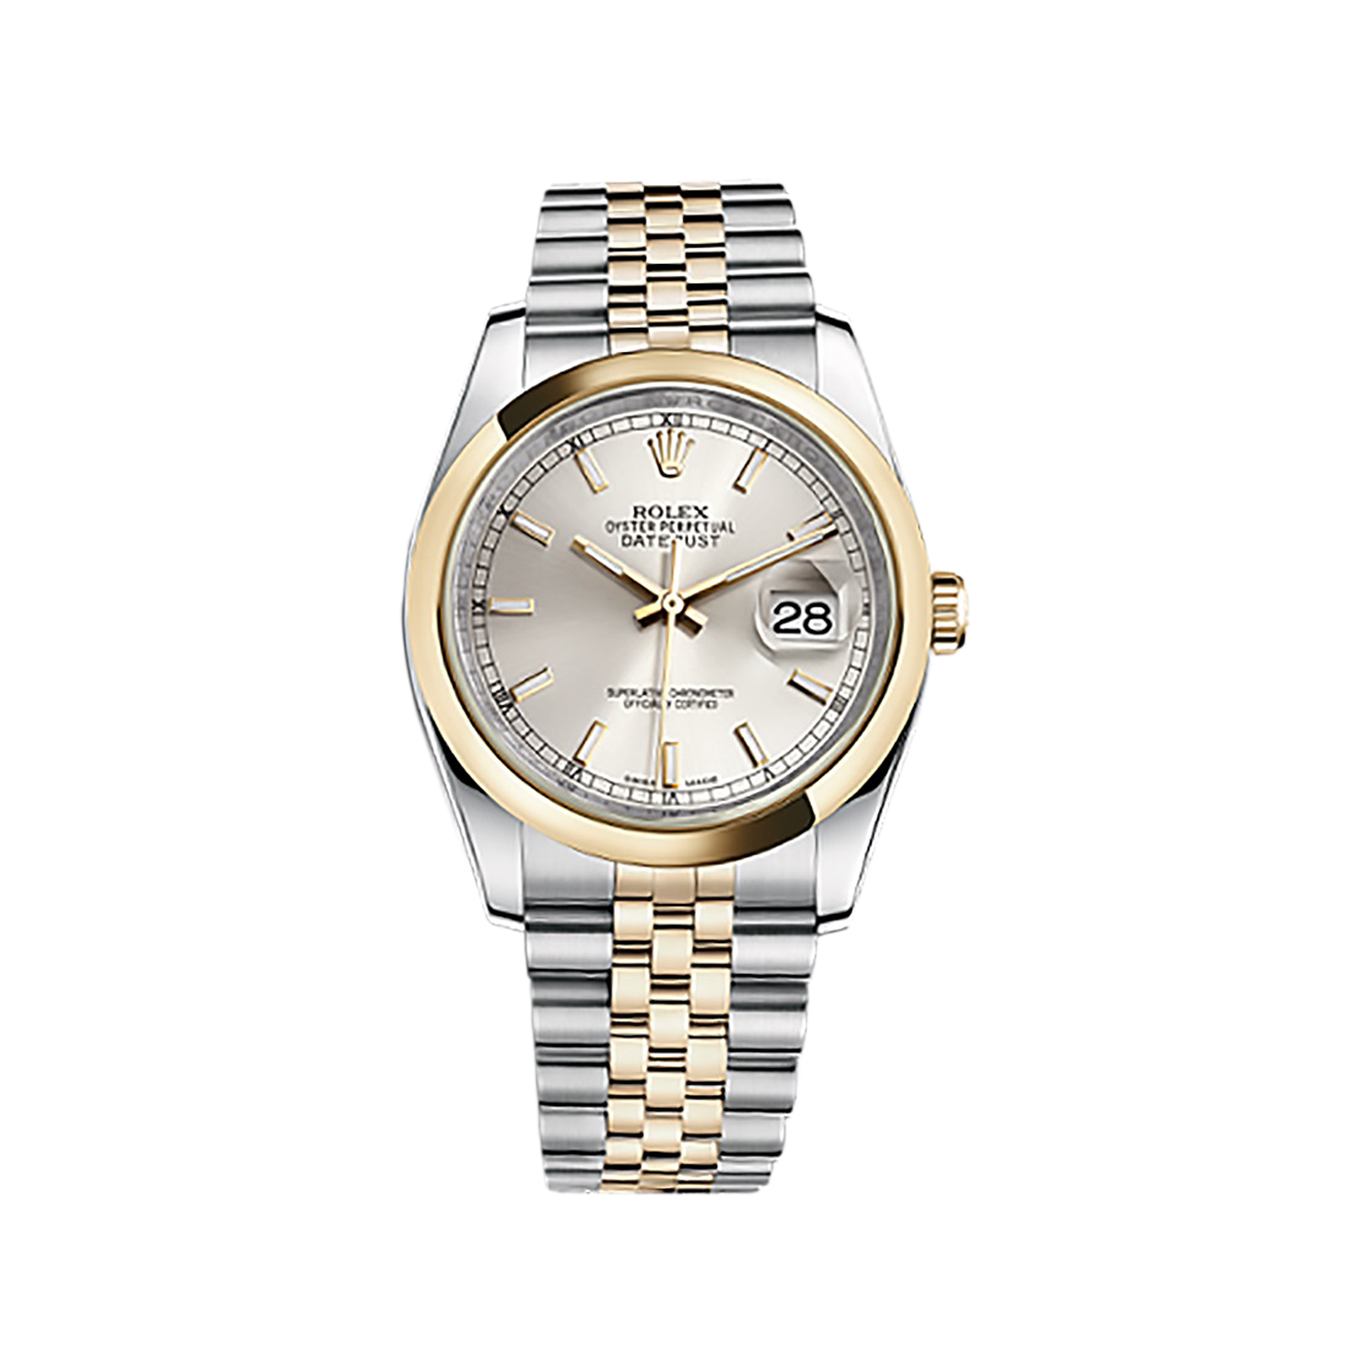 Datejust 36 116203 Gold & Stainless Steel Watch (Silver) - Click Image to Close